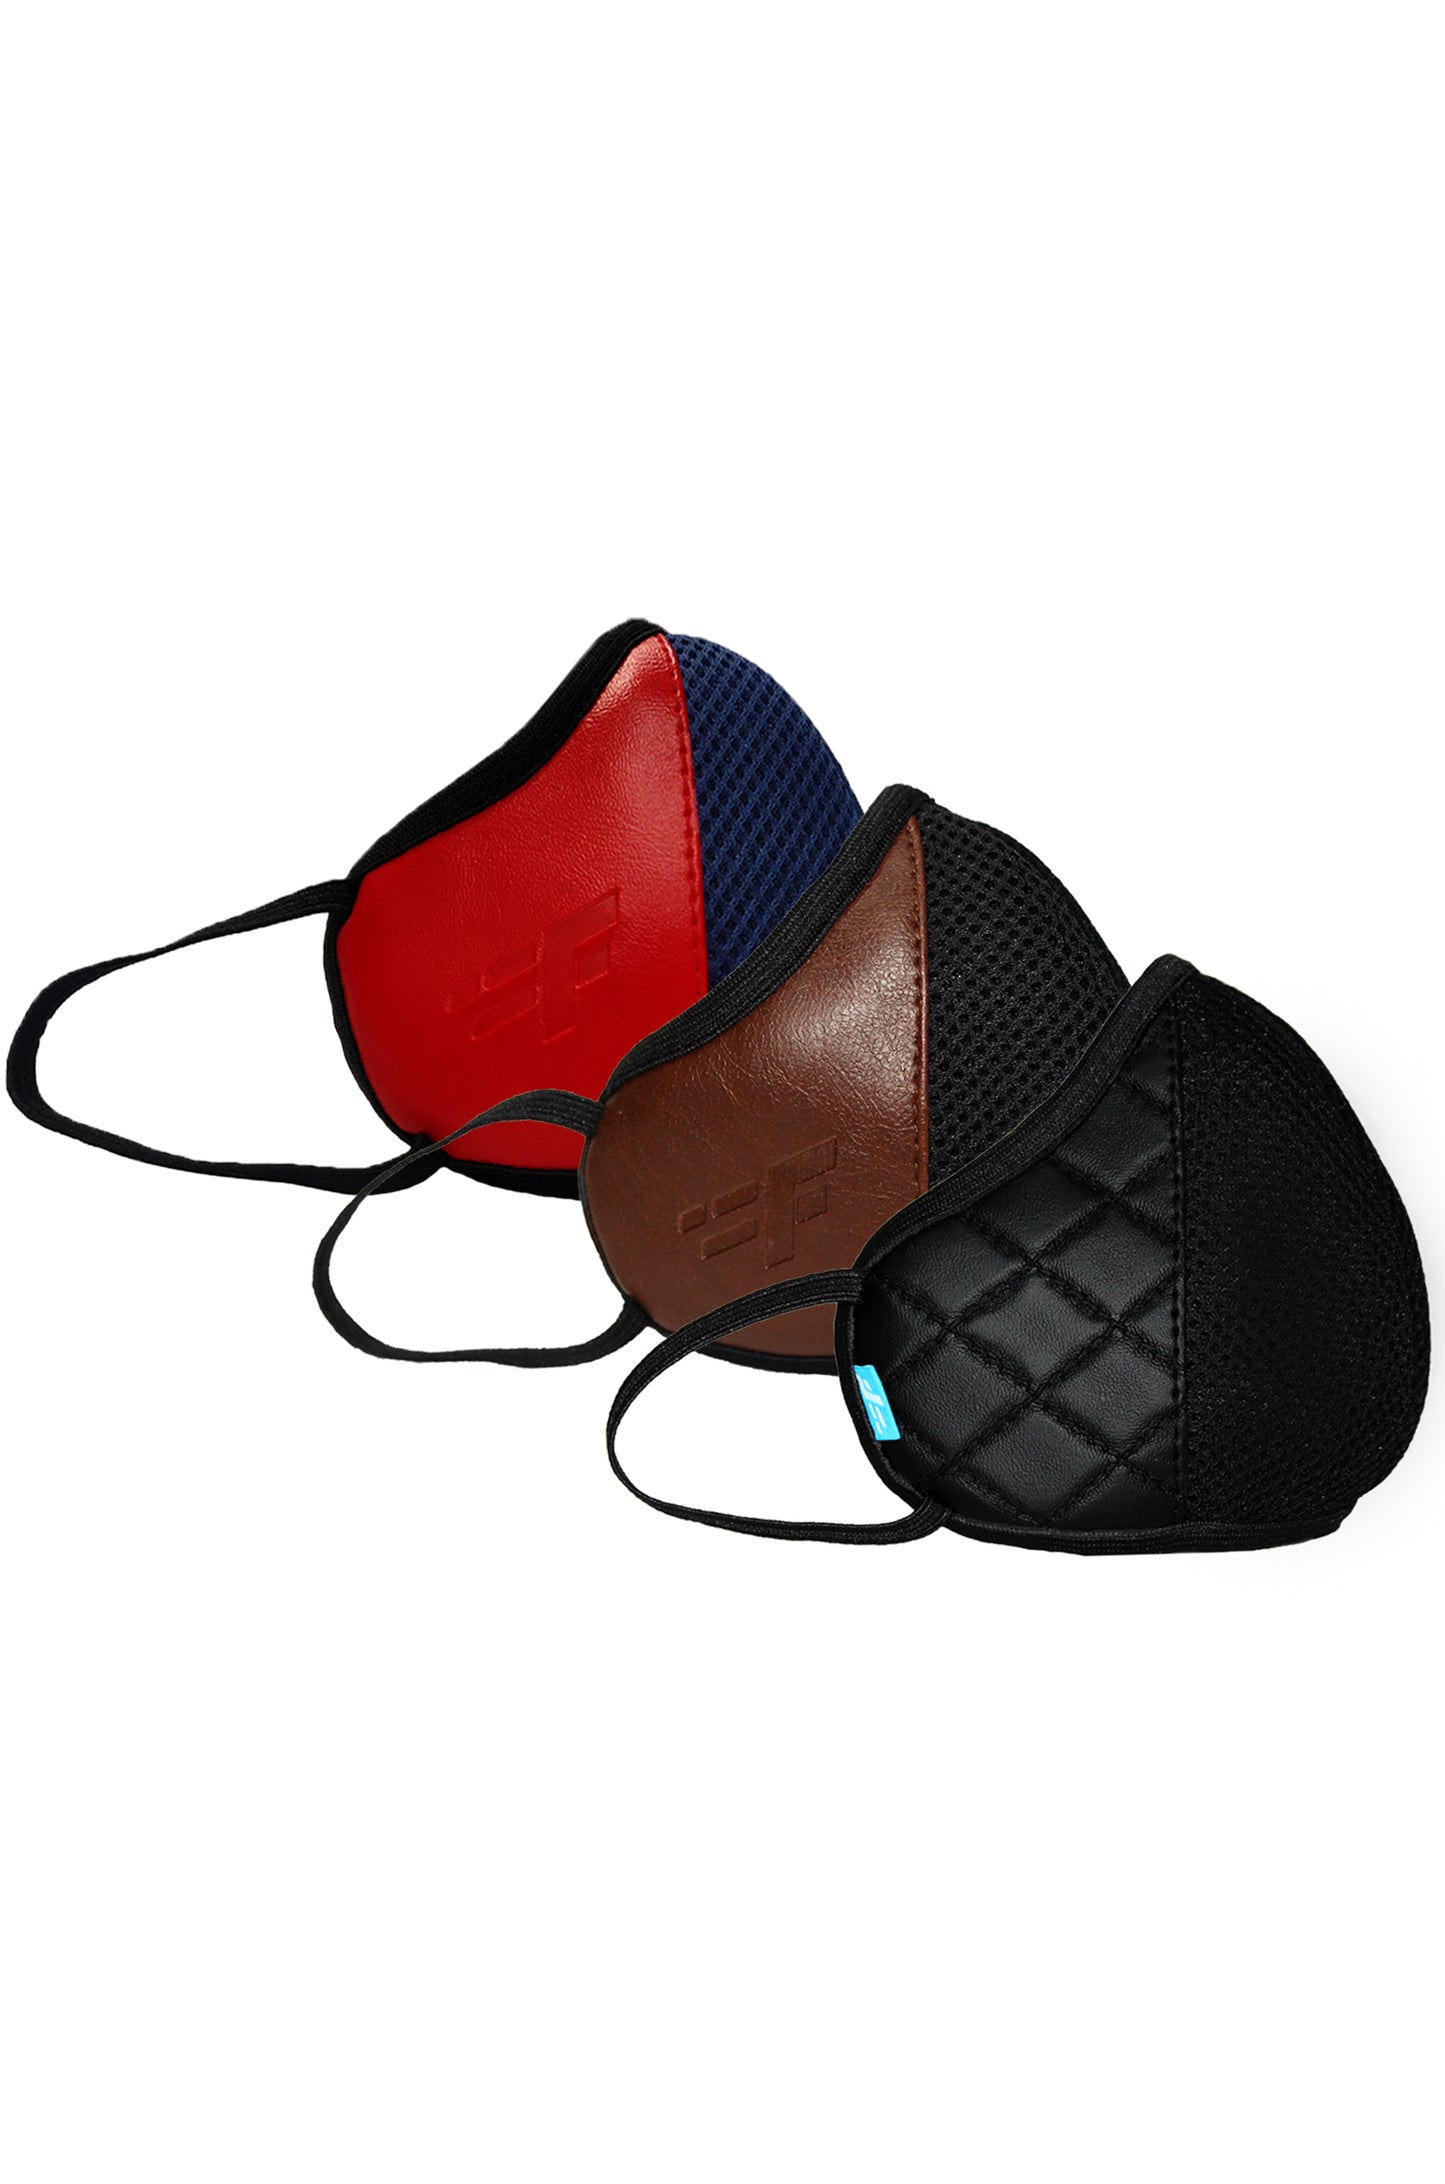 F Gear Luxur Diamond Black - Navy blue/Red - Brown F95 Leatherette Mask 7 layer ISO CE SITRA lab certified >95% Bacteria Filtration PACK-3